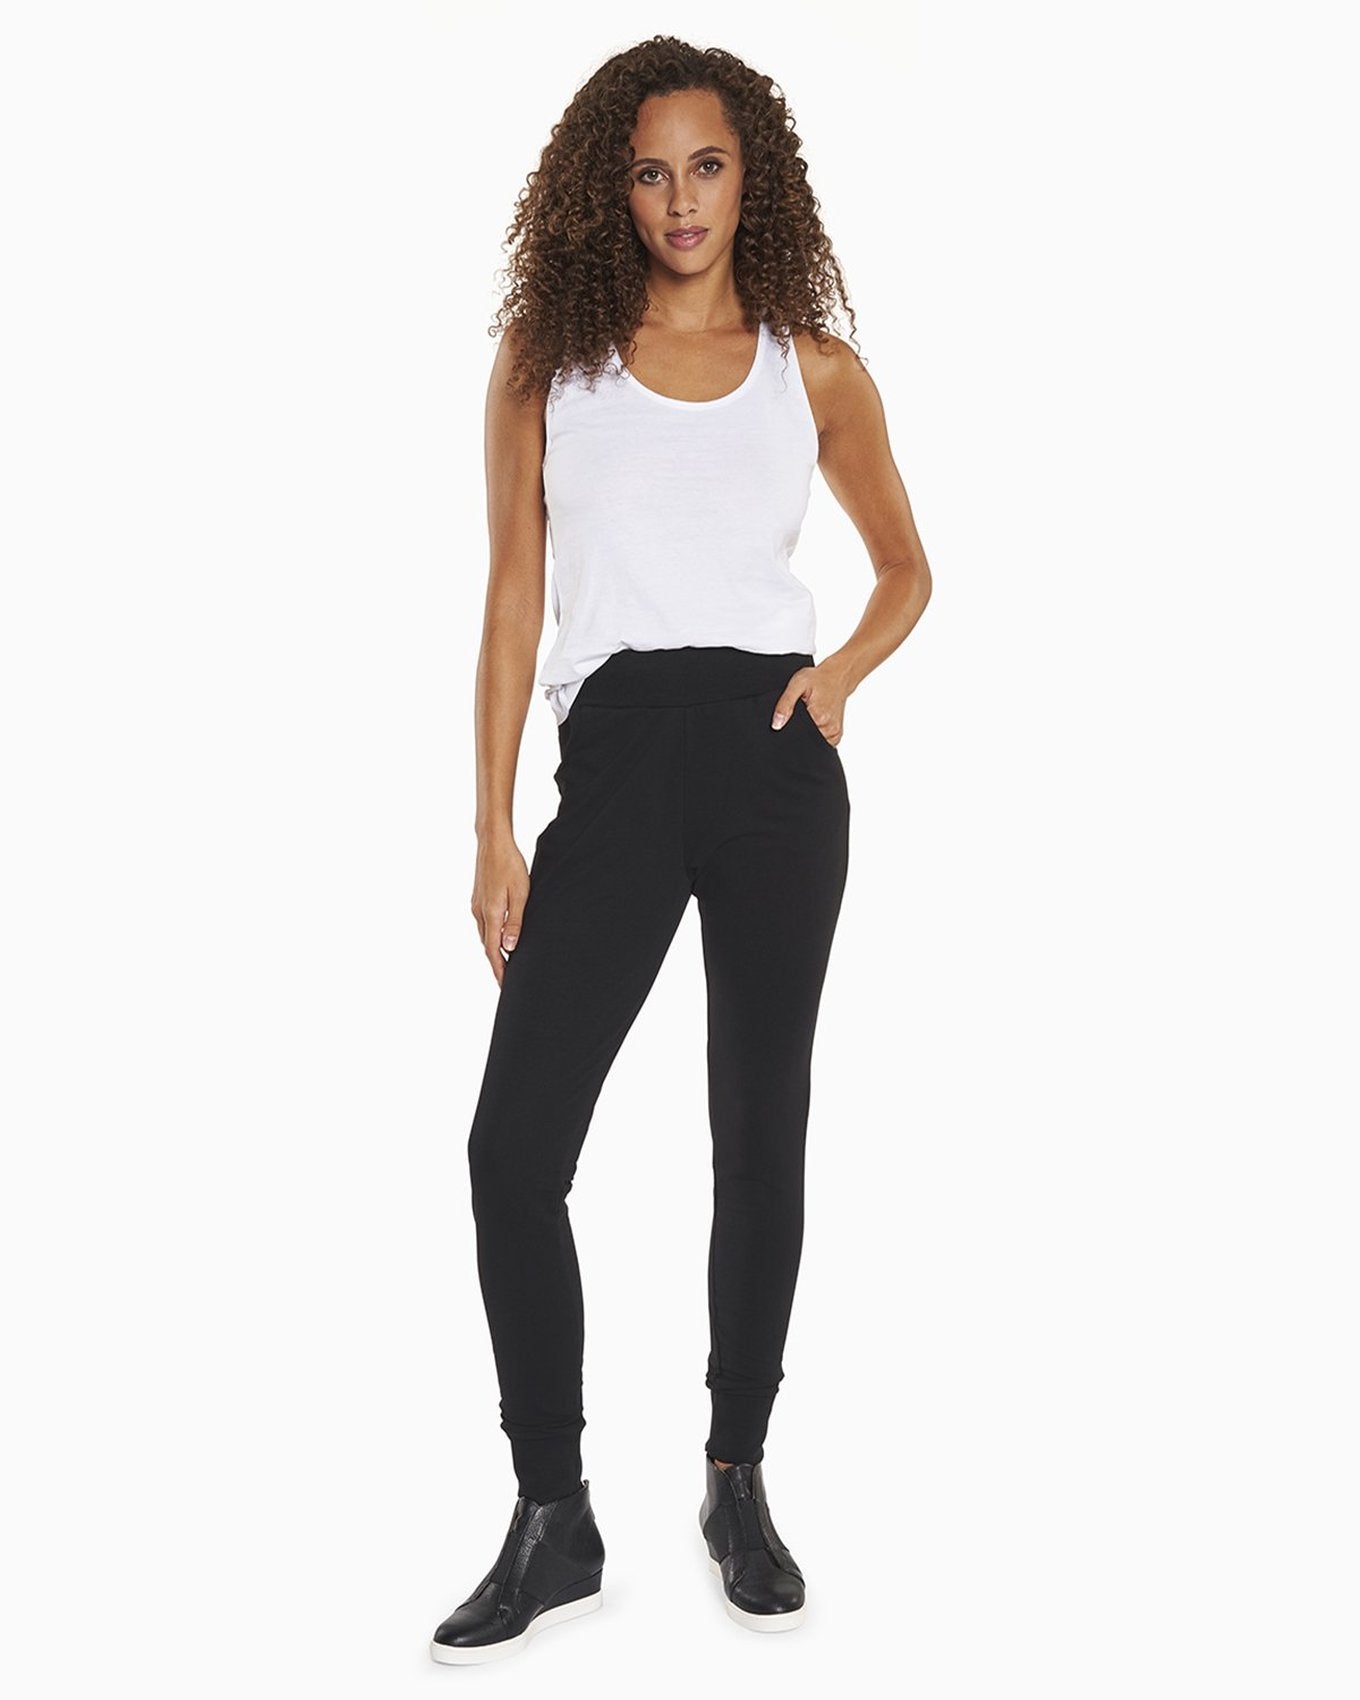 YesAnd Organic Jogger Jogger in color Jet Black and shape jogger/sweatpant